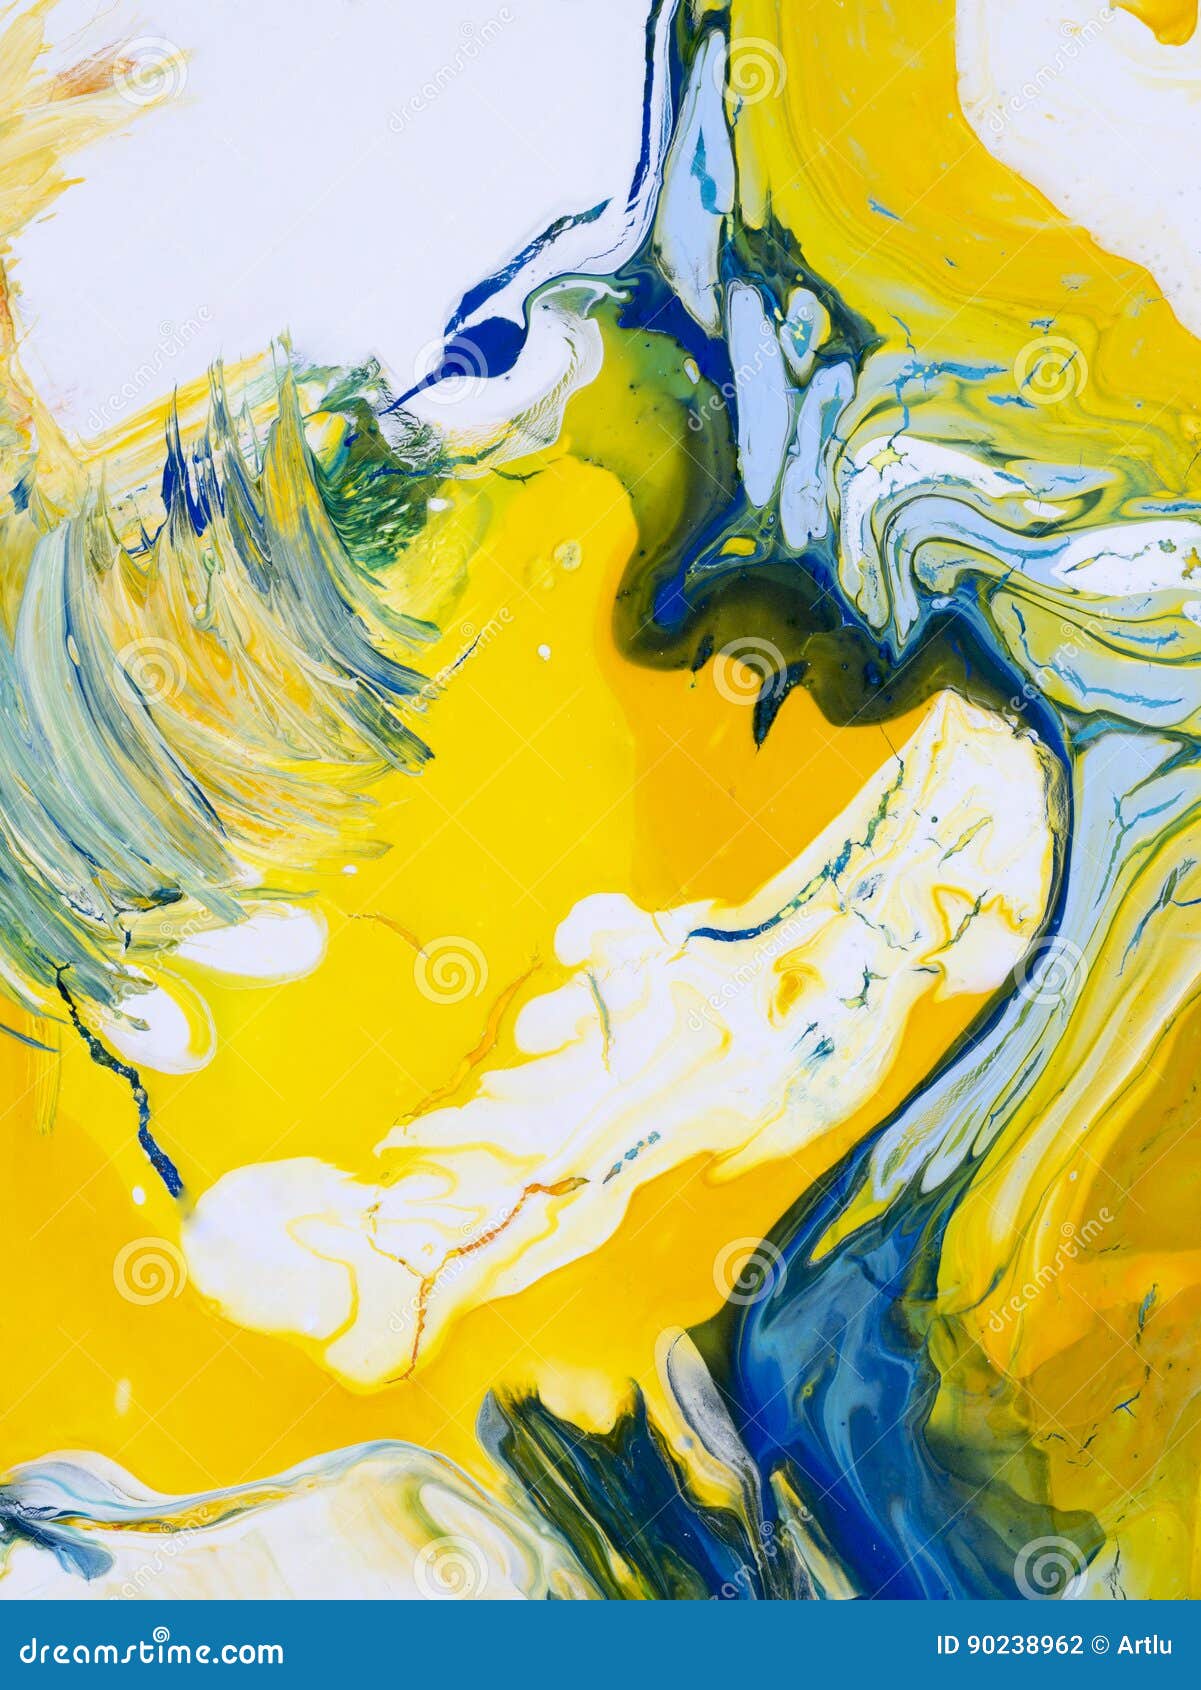 Blue and Yellow Abstract Hand Painted Background, Acrylic Painting on  Canvas. Stock Illustration - Illustration of artistic, spot: 90238962